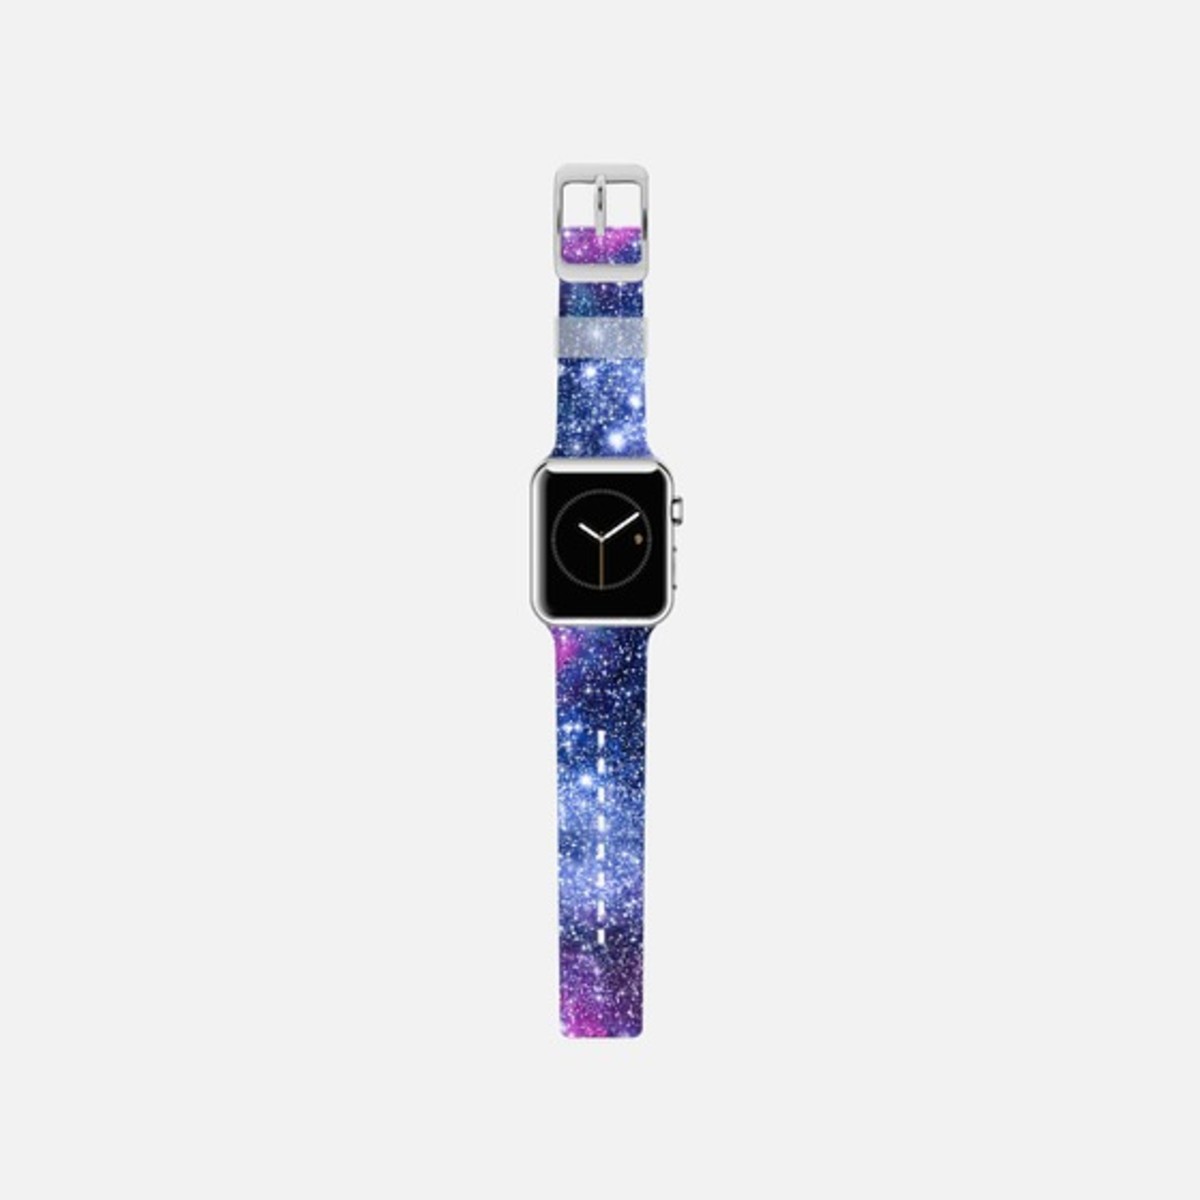 One of the bands on Casetify. Photo: Casetify